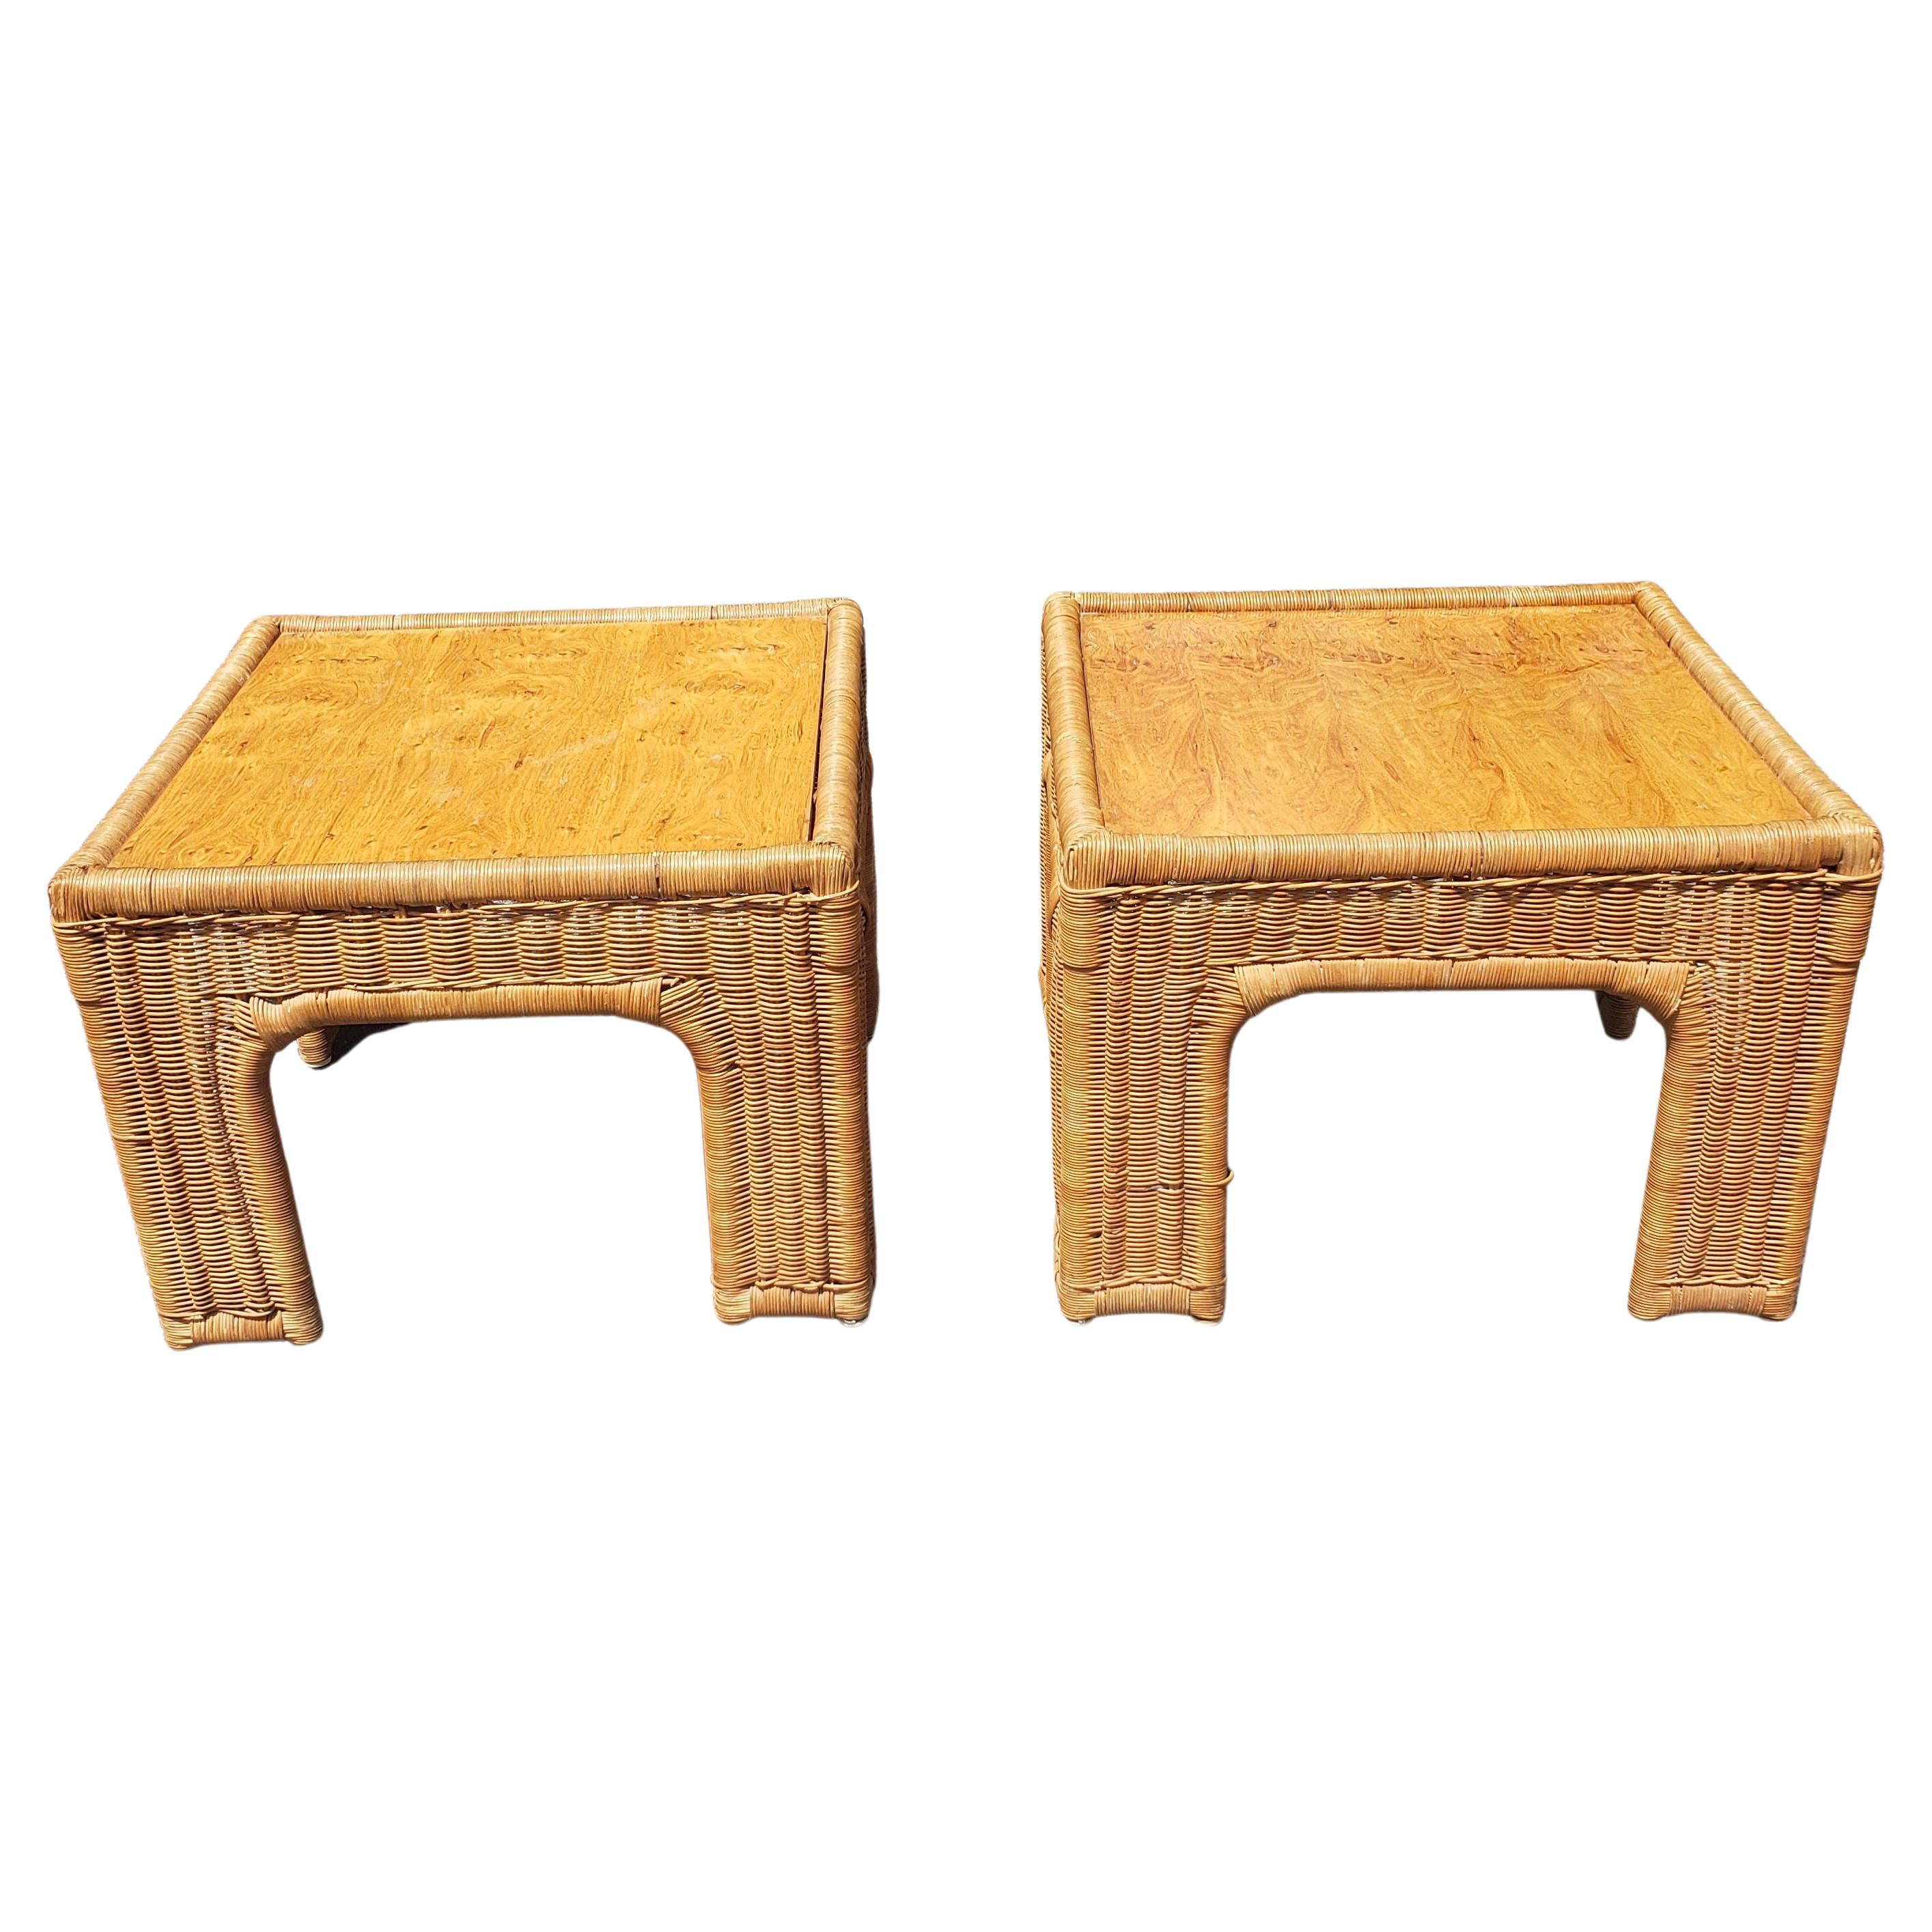 Pair of Vintage Woven Wicker and Wood Top Side Tables by Thomasville For Sale